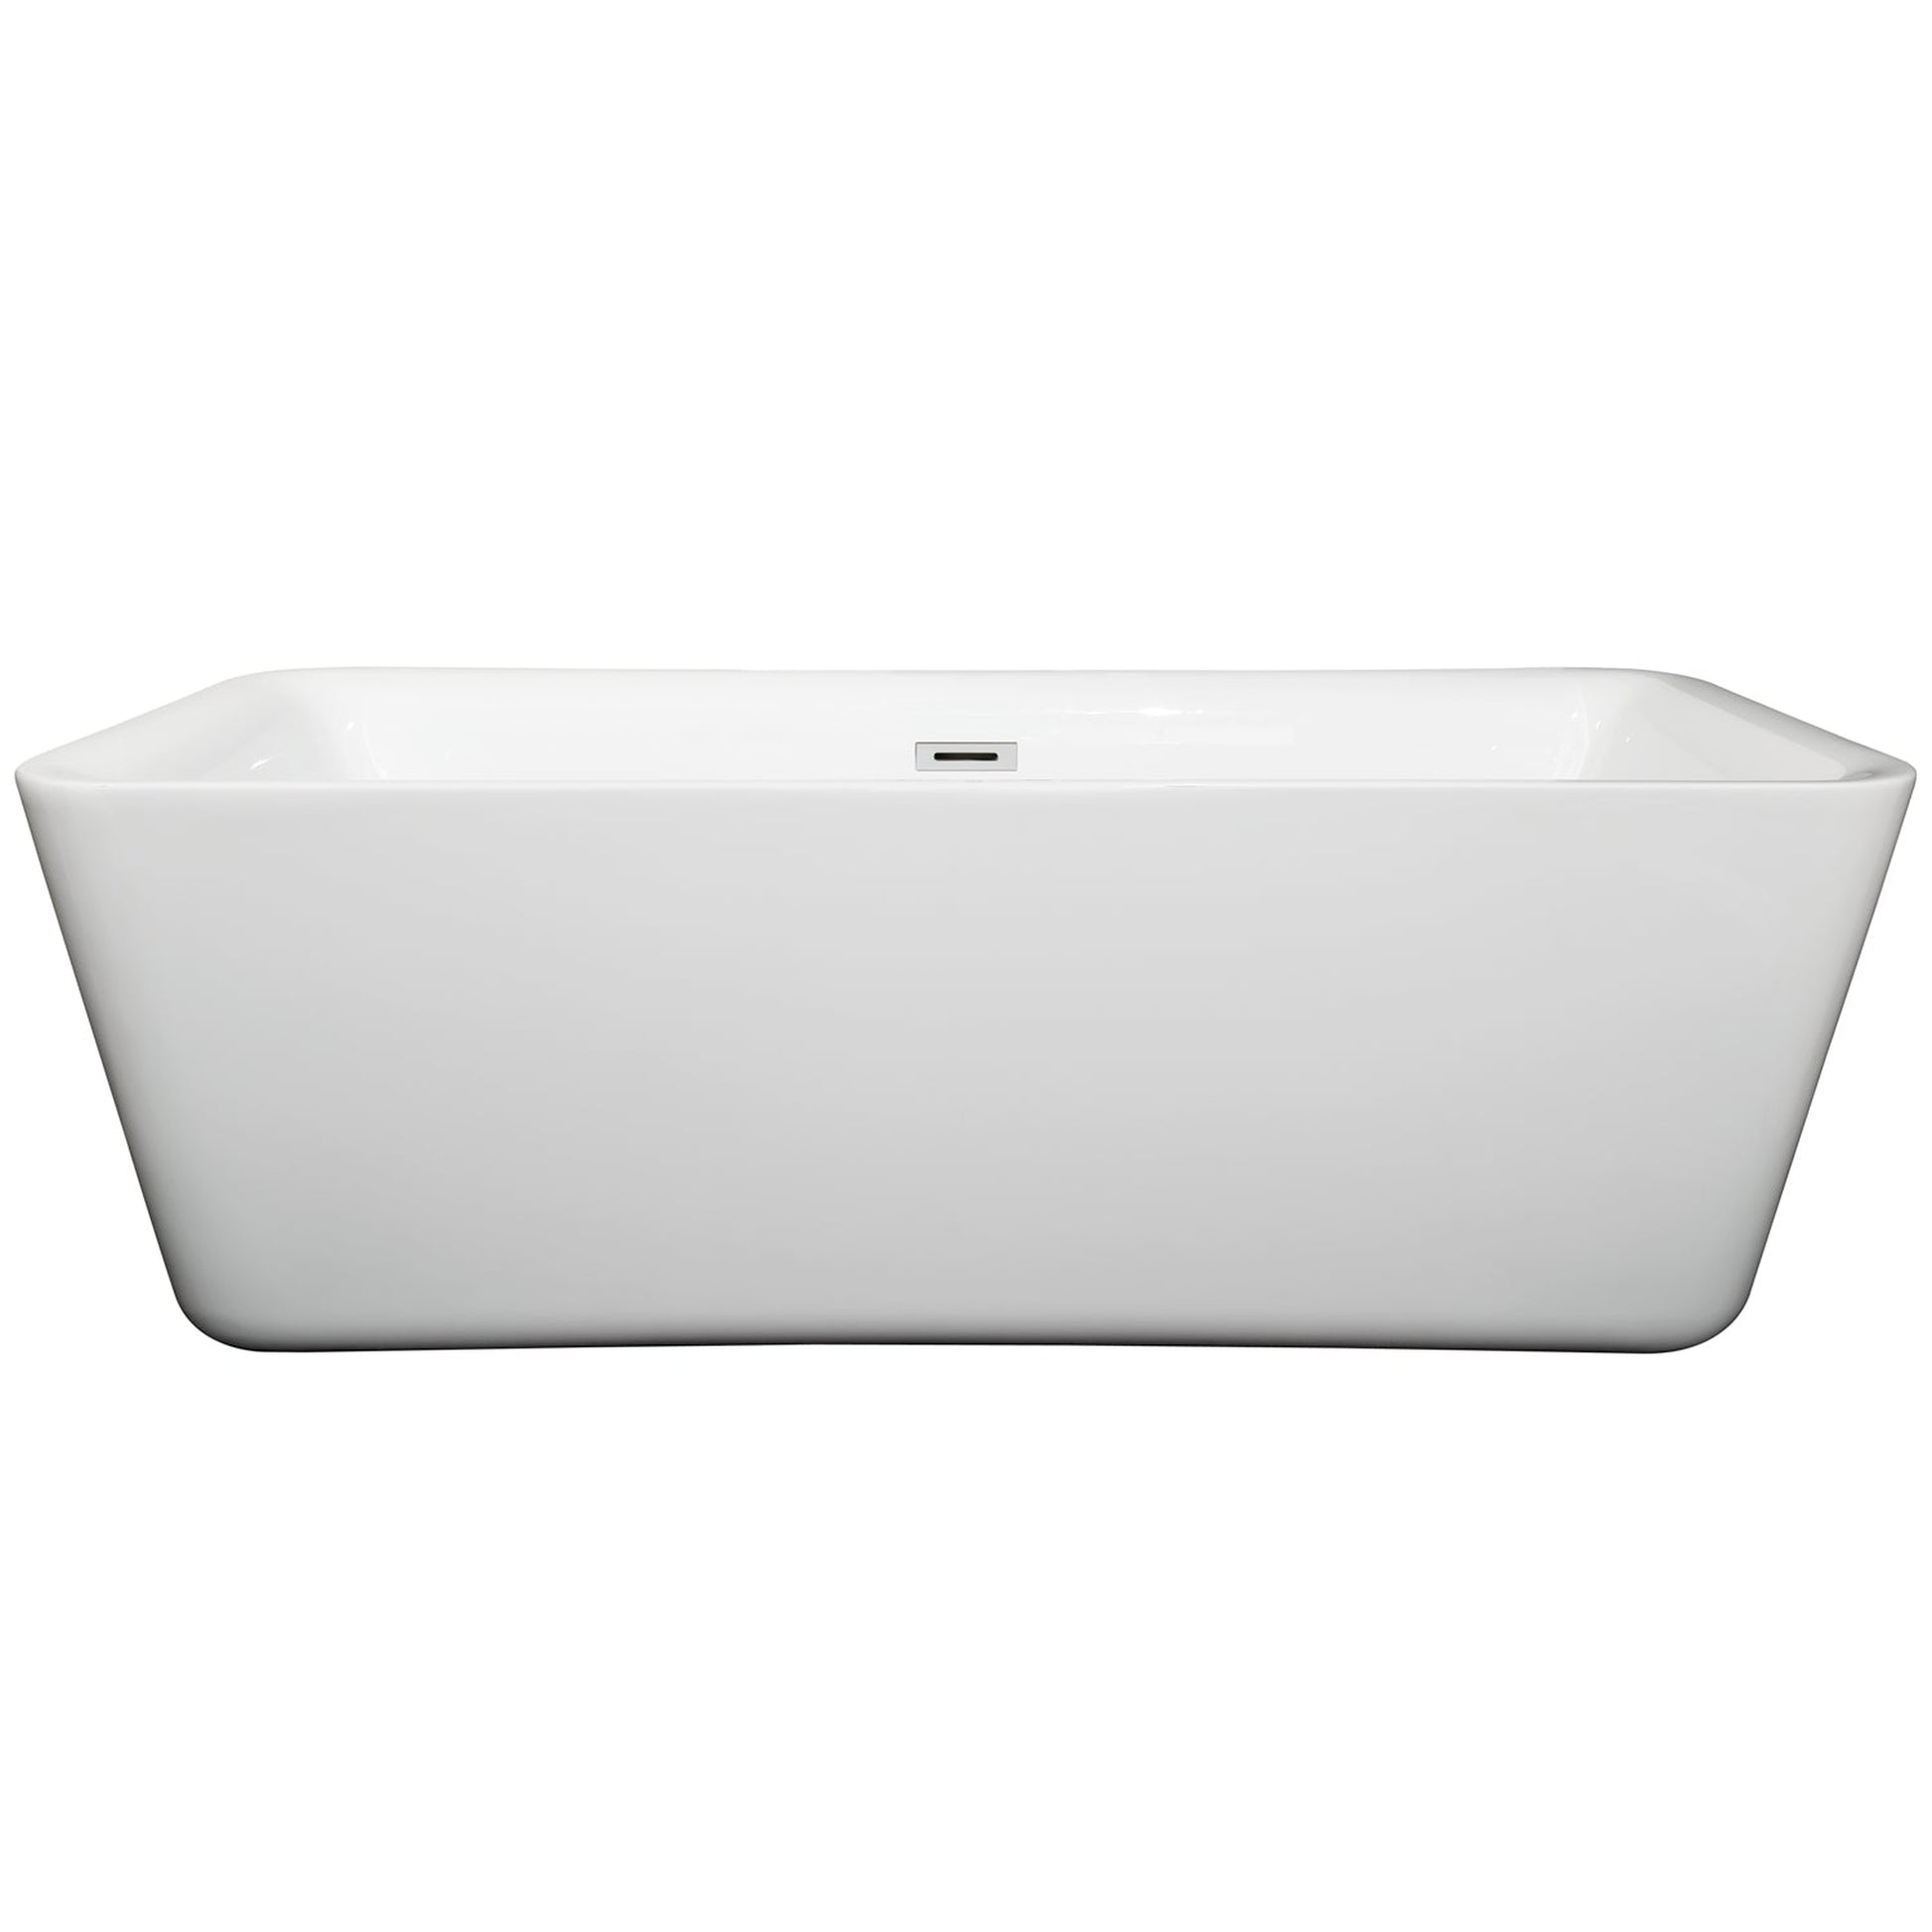 Wyndham Collection Emily 69" Freestanding Bathtub in White With Polished Chrome Drain and Overflow Trim